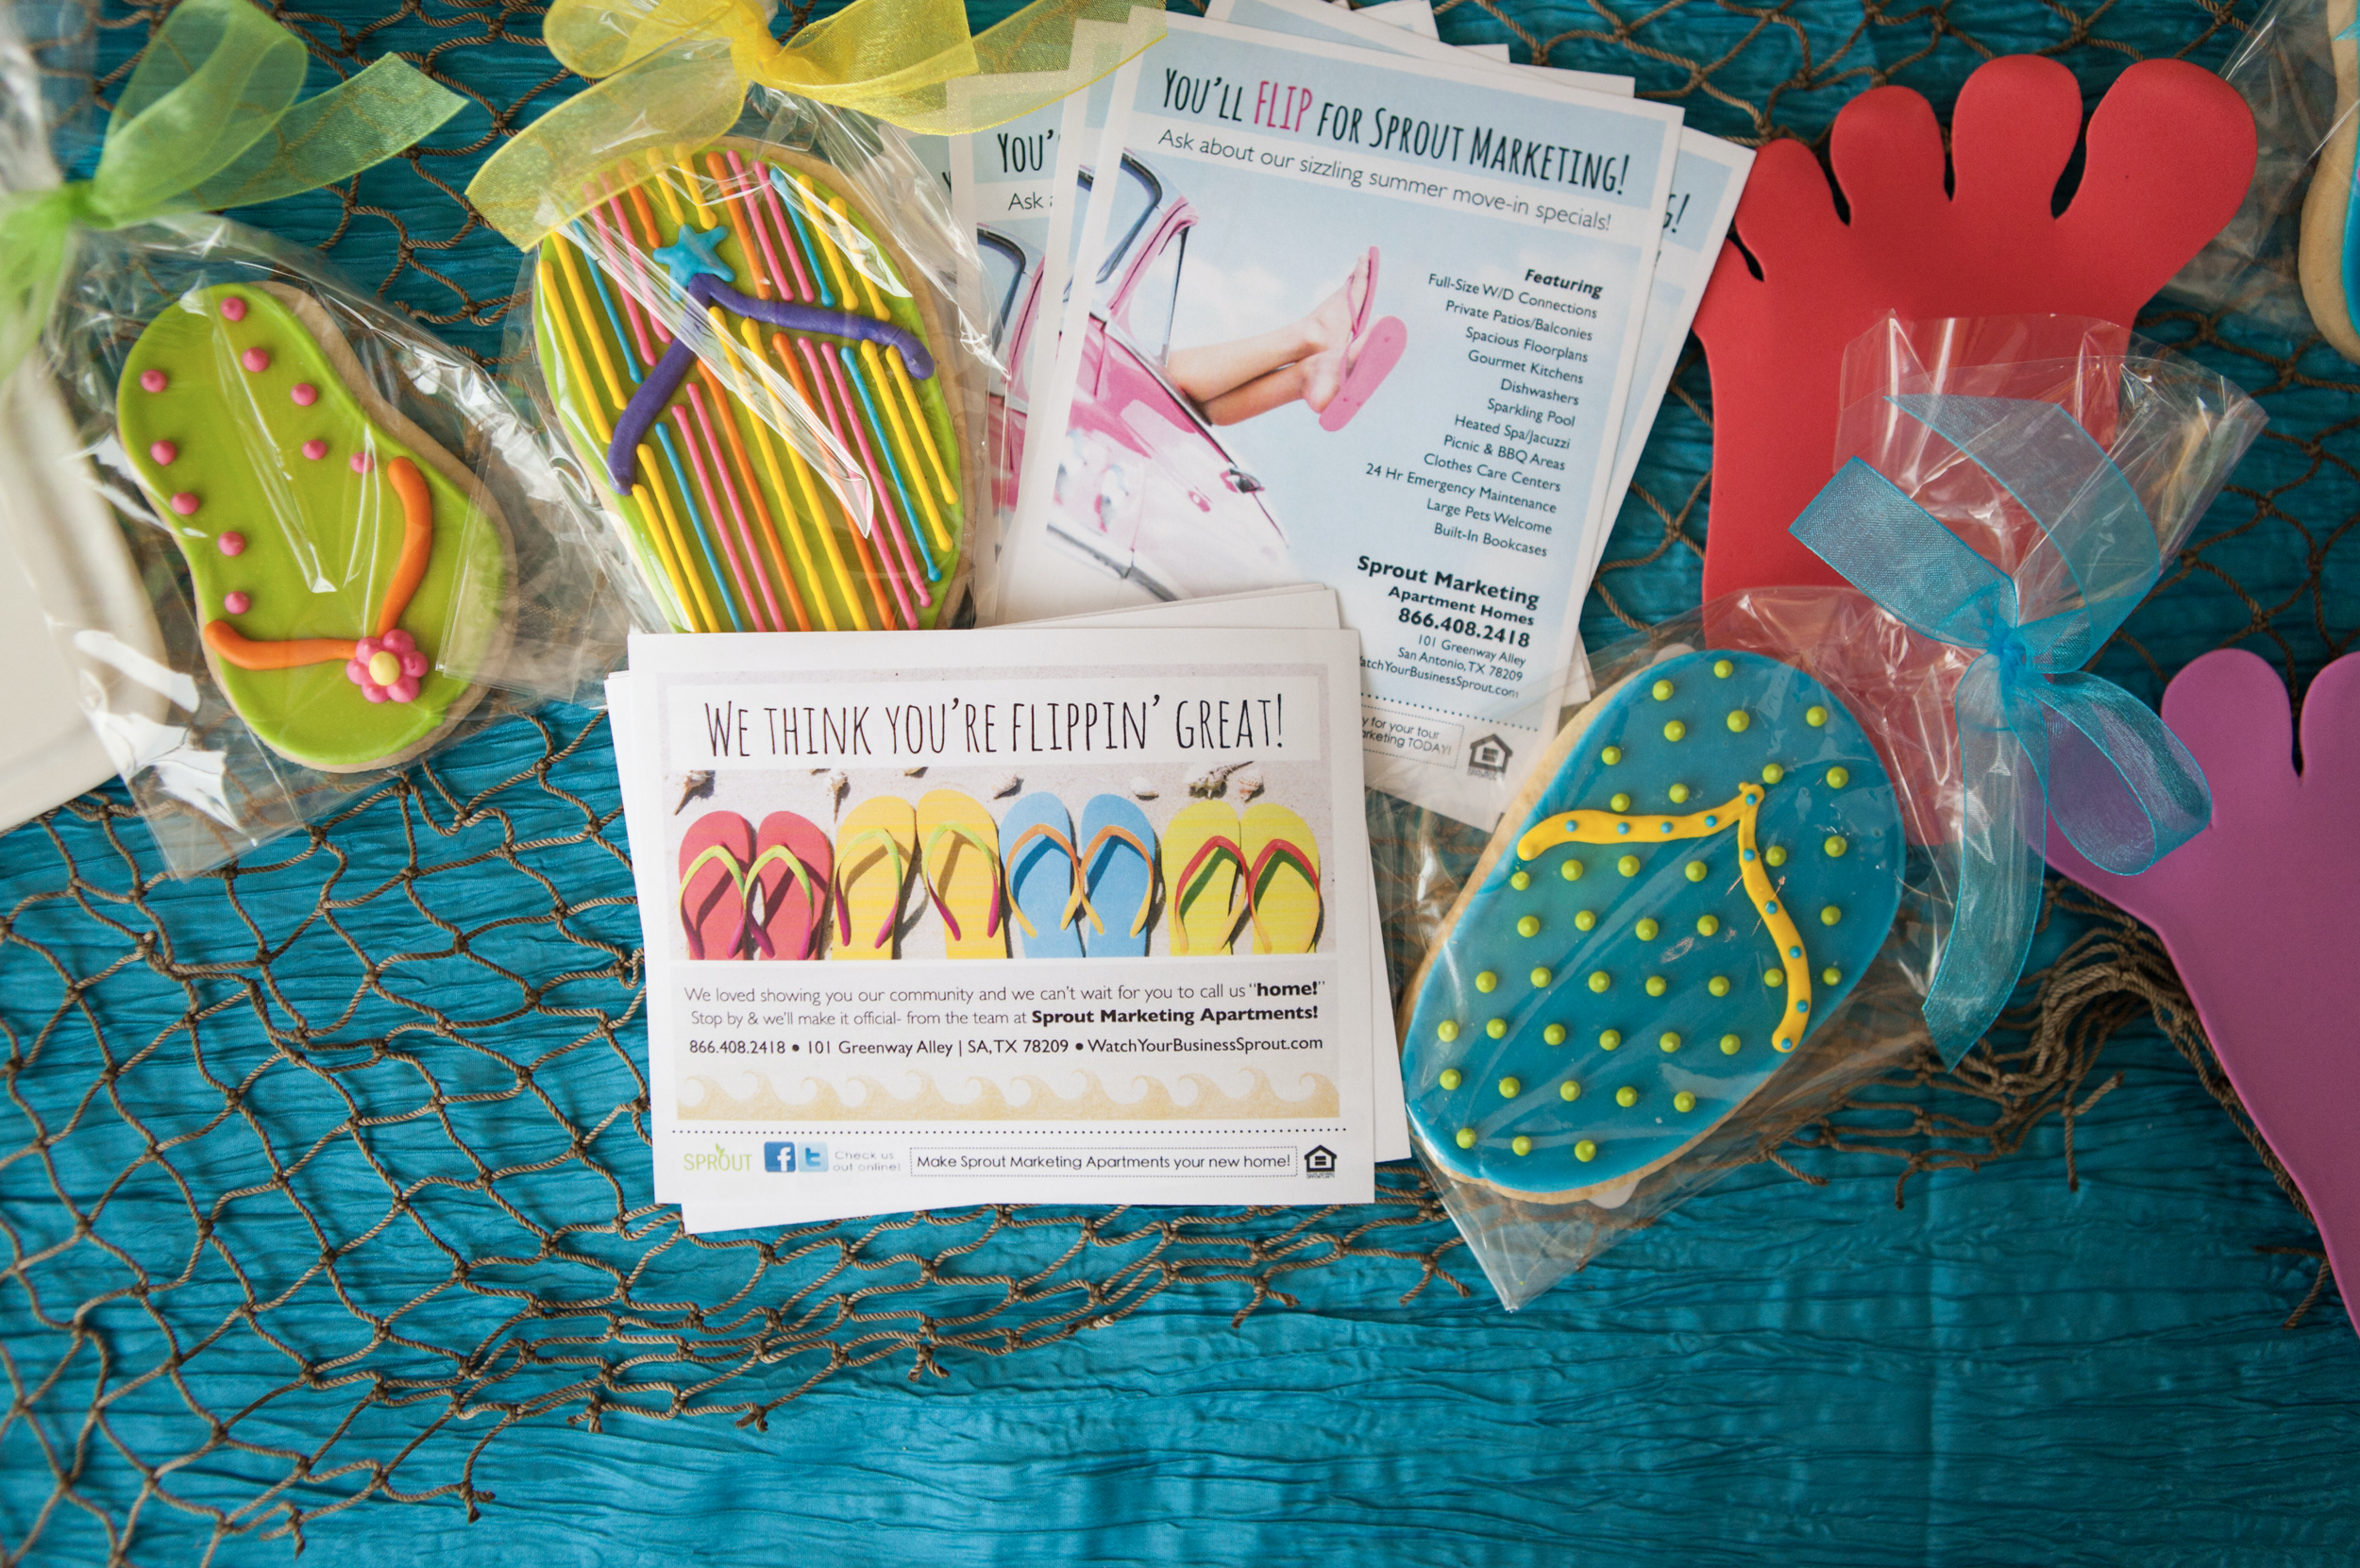 Flip Flop themed postcards and cookies for apartment outreach marketing or resident gifts